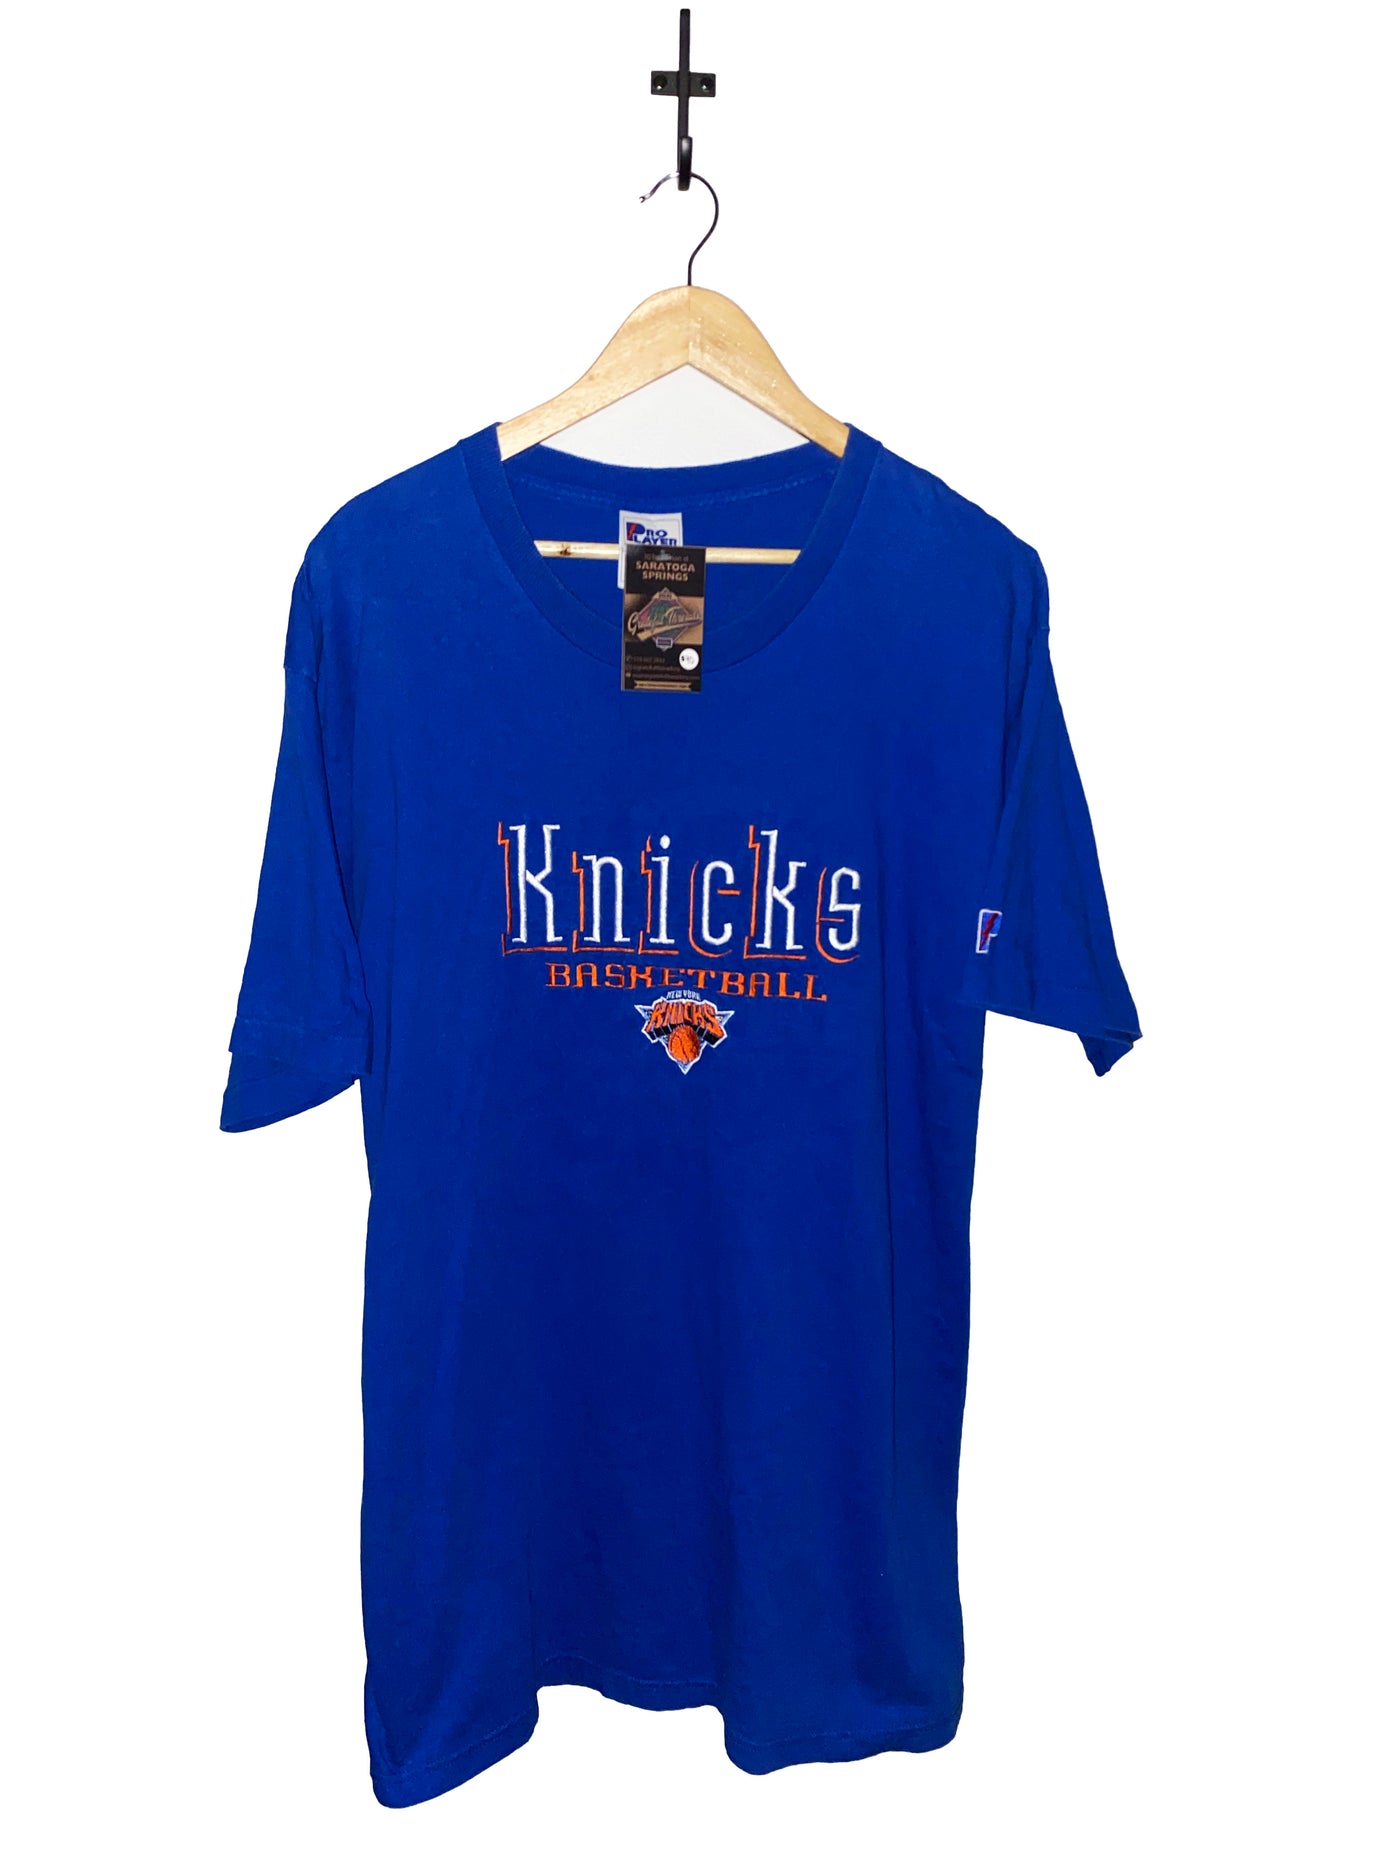 Vintage 90s Embroidered Knicks T-Shirt